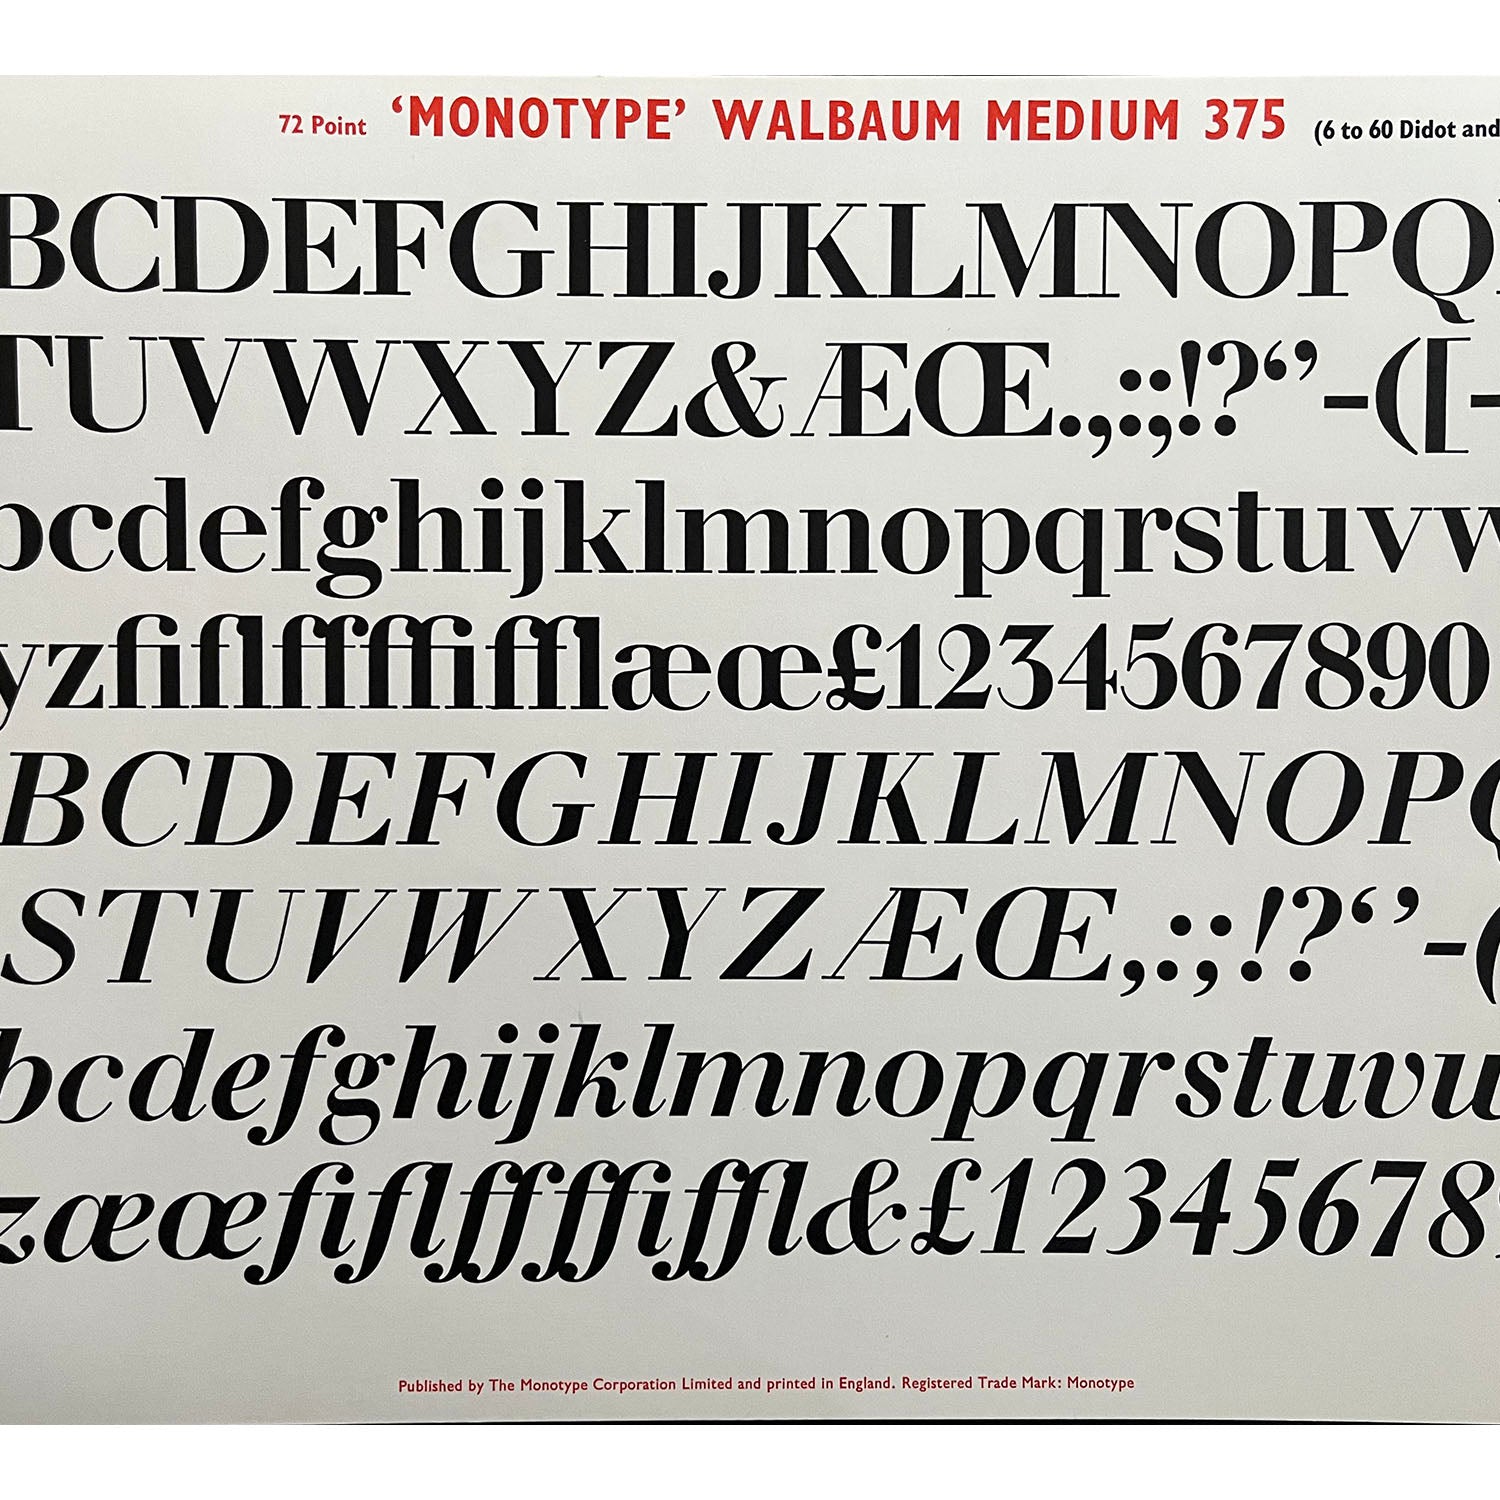 original printer’s sample sheet, Walbaum Medium 375 (6 to 60 didcot & 72 Point), published by the Monotype Corporation Ltd